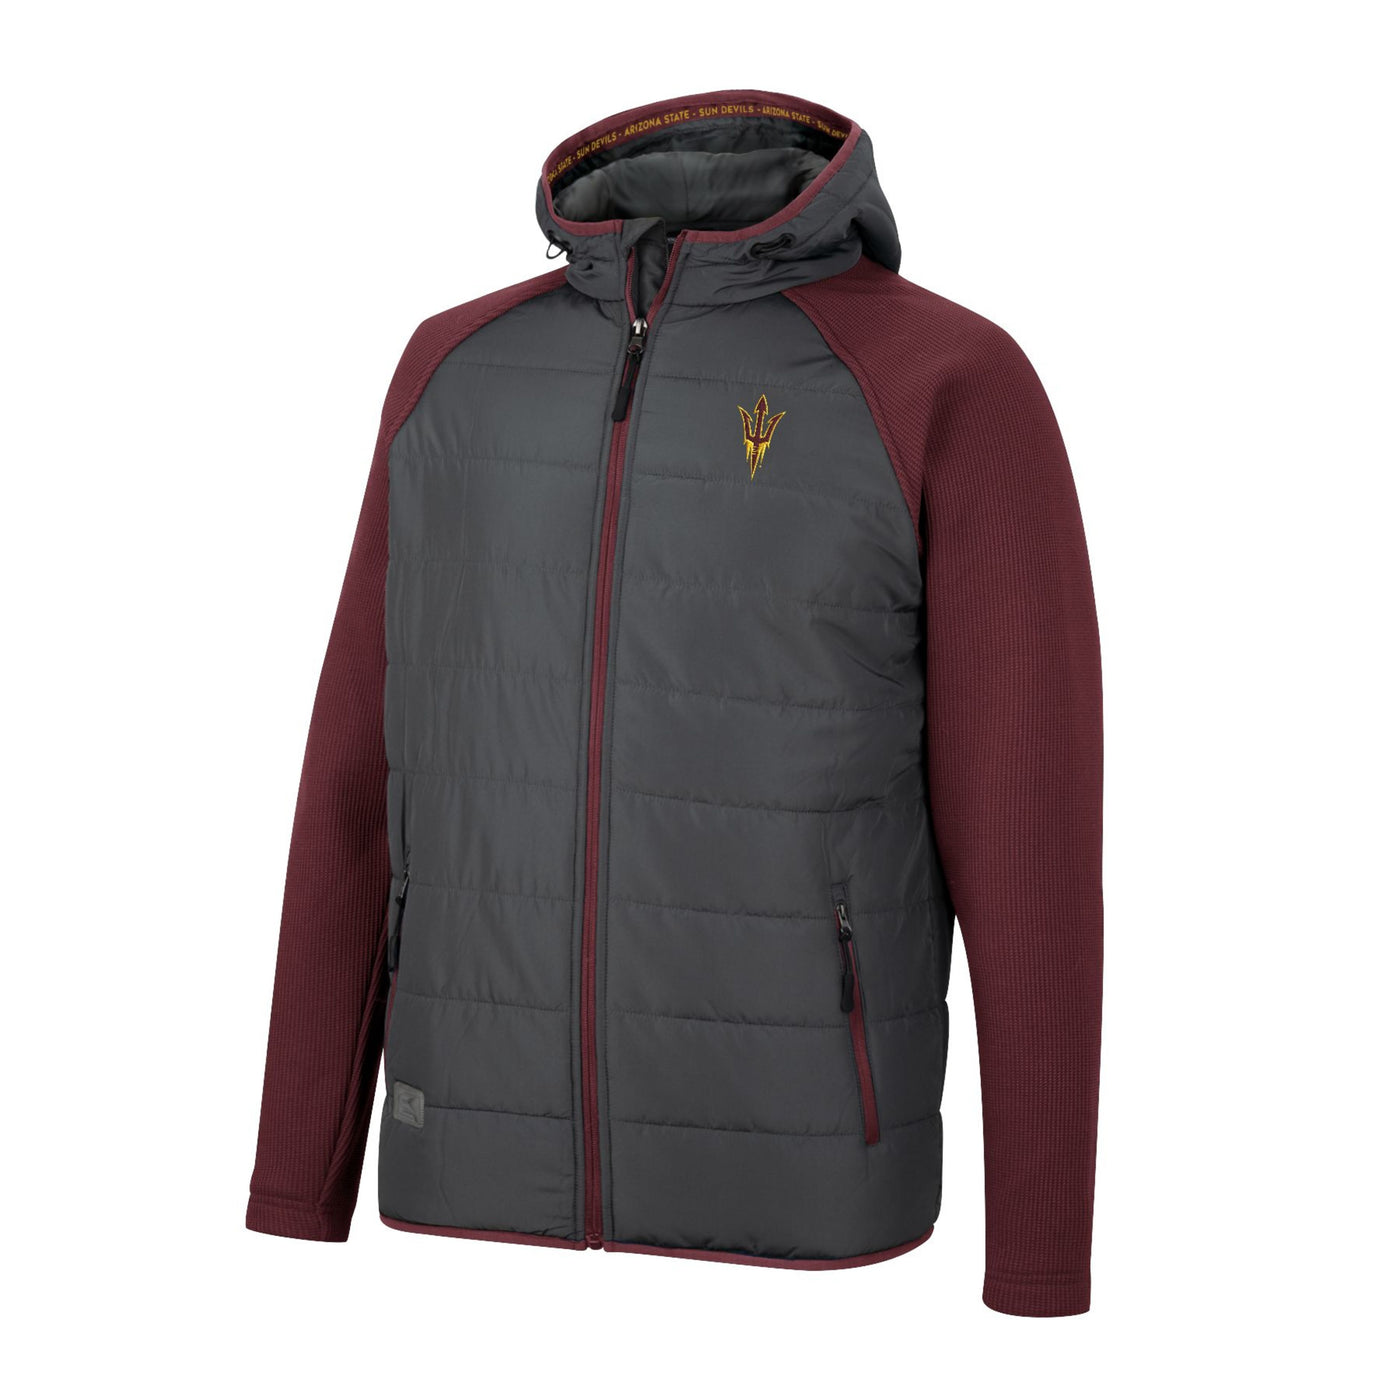 ASU grey and maroon jacket featuring a puffer like body and slim sleeves. Pitchfork path in maroon and gold is on the chest. 